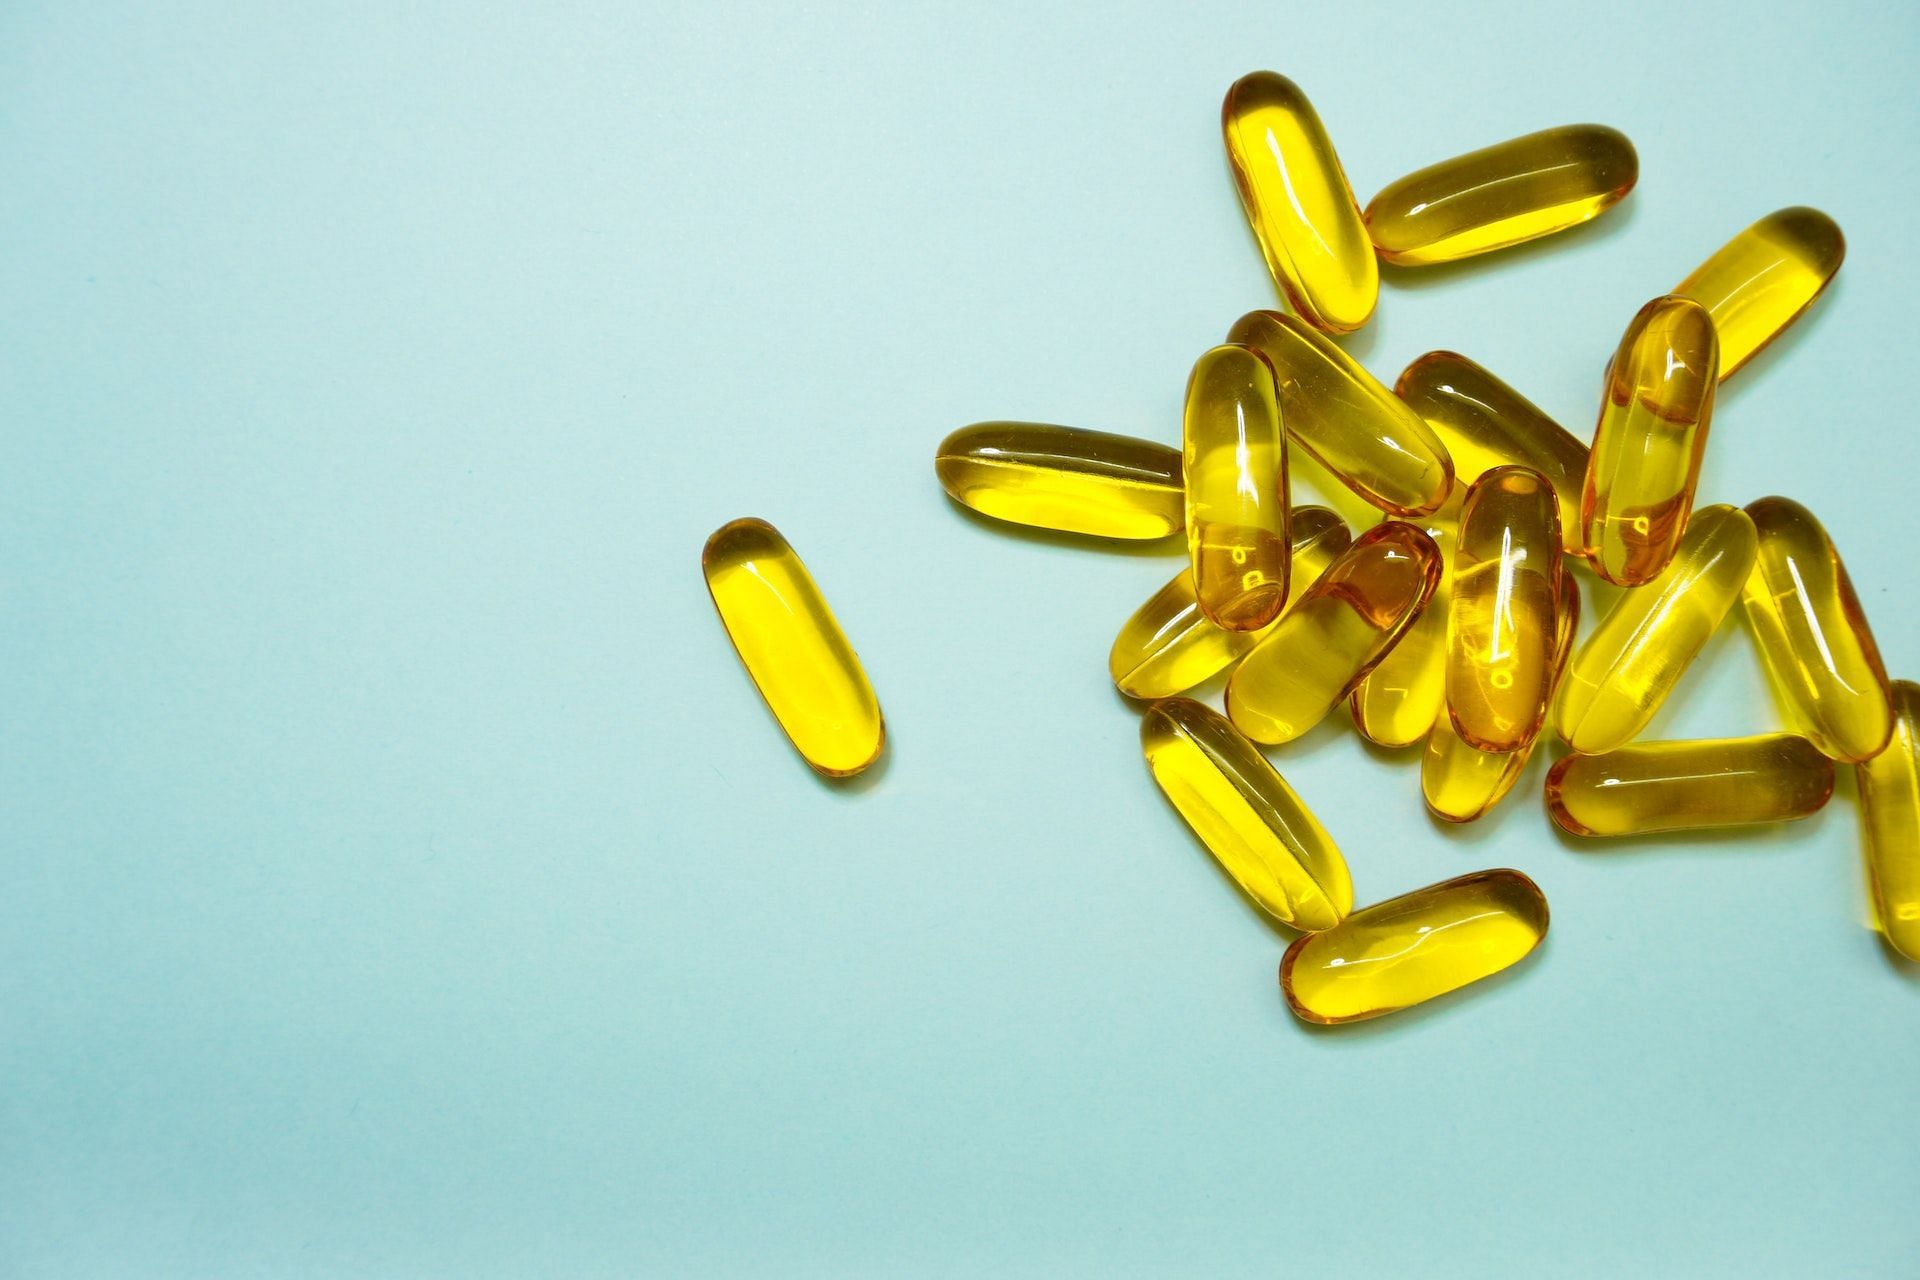 There are several benefits of consuming omega-3 supplements every day. (Photo via Pexels/Leohoho)